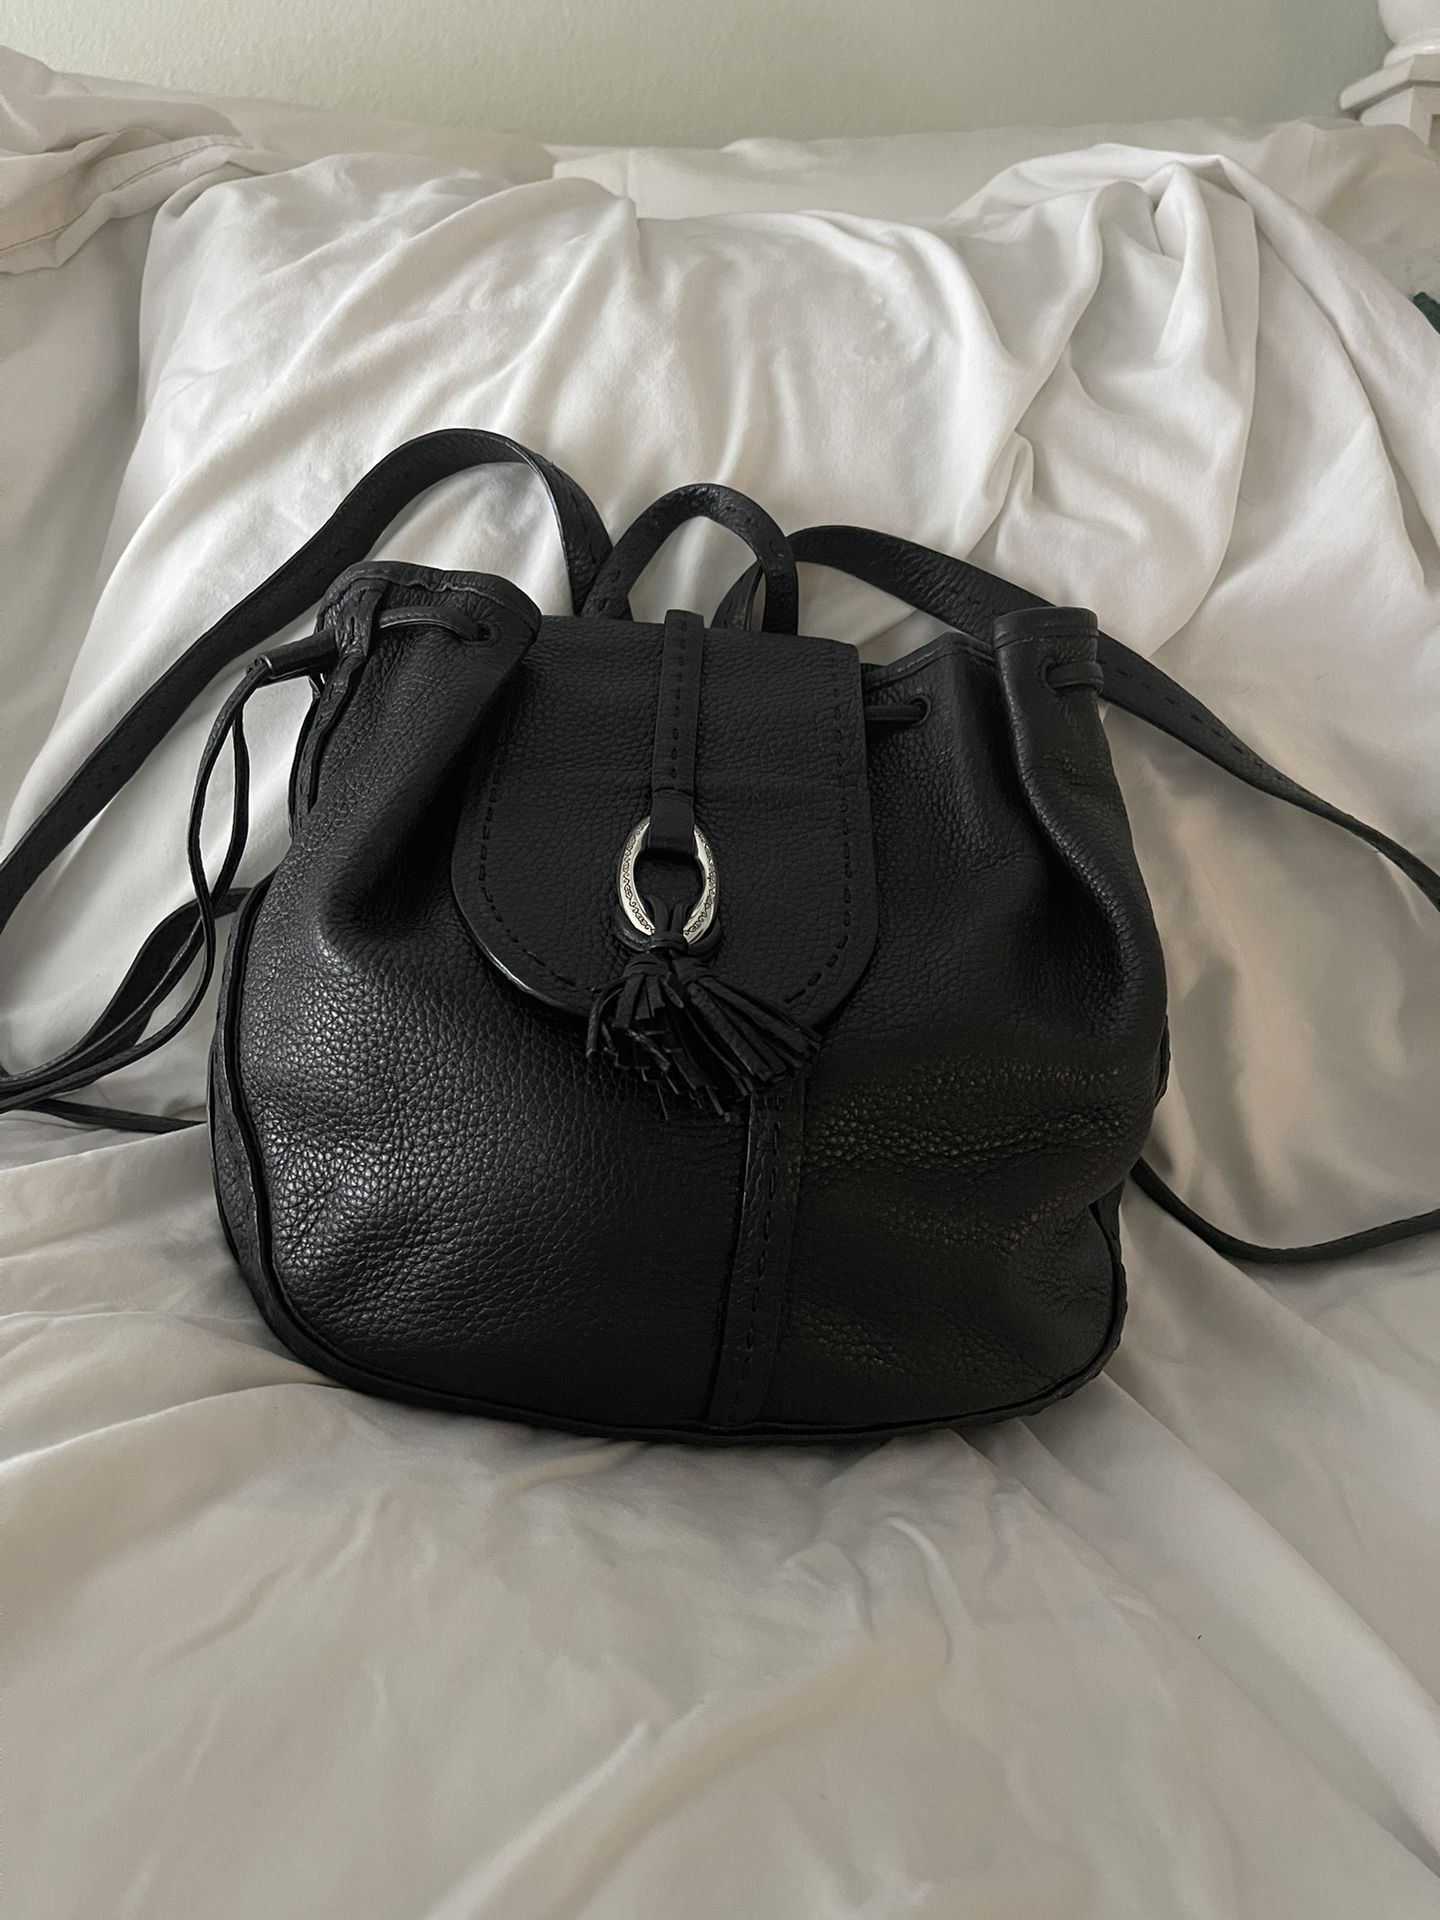 Brighton Leather Backpack Purse